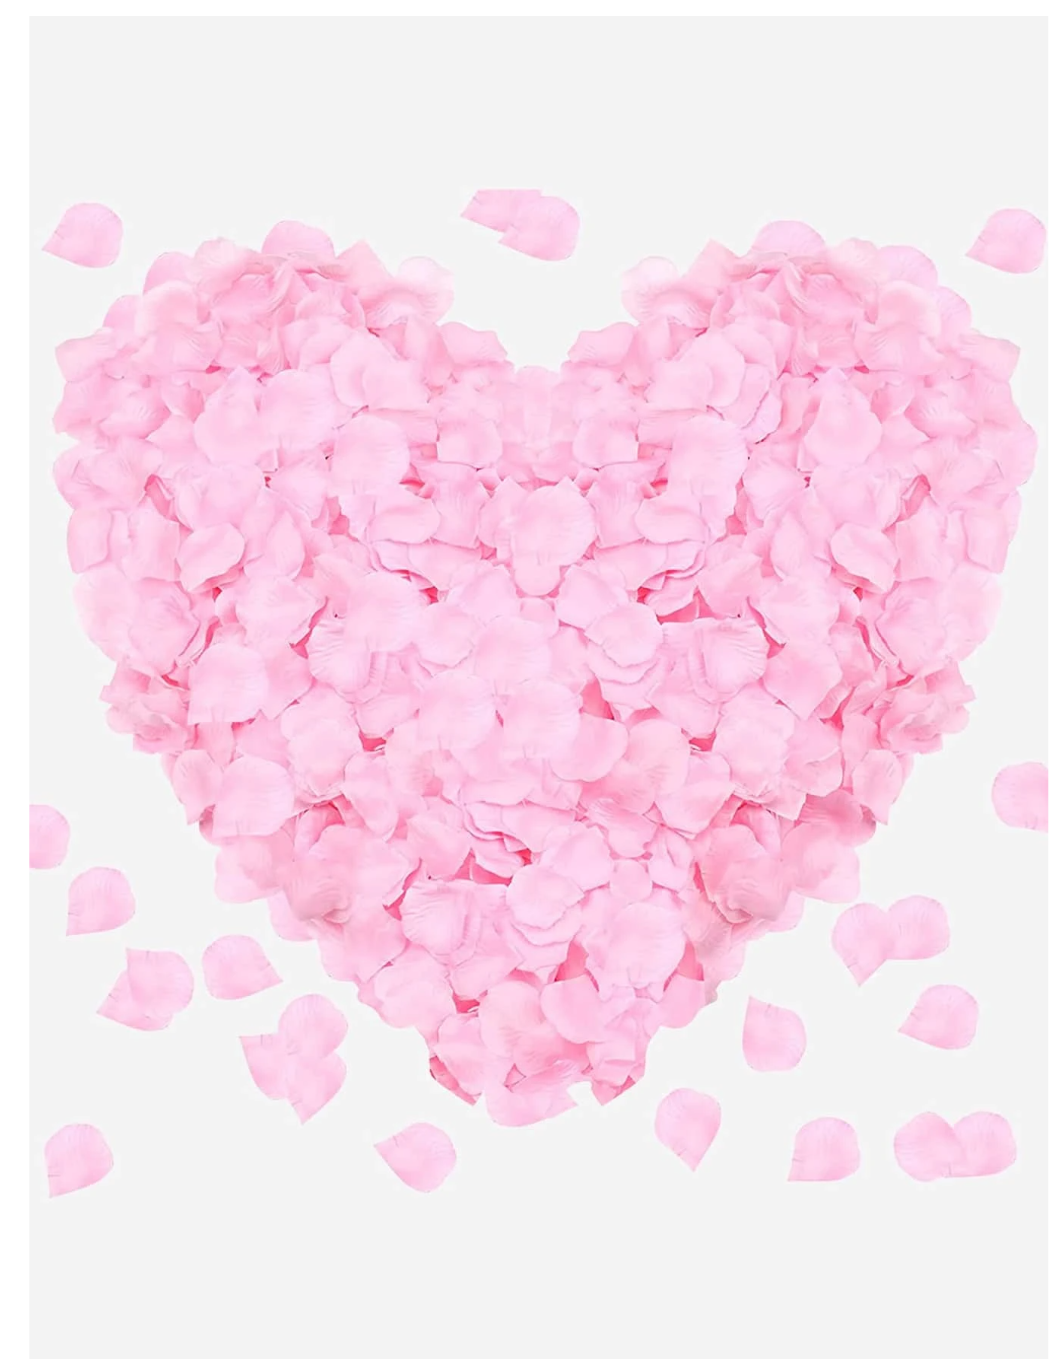 Blooms of Love: 1200pcs Artificial Rose Petals, the Perfect Floral Touch for Valentine's Day and Weddings!